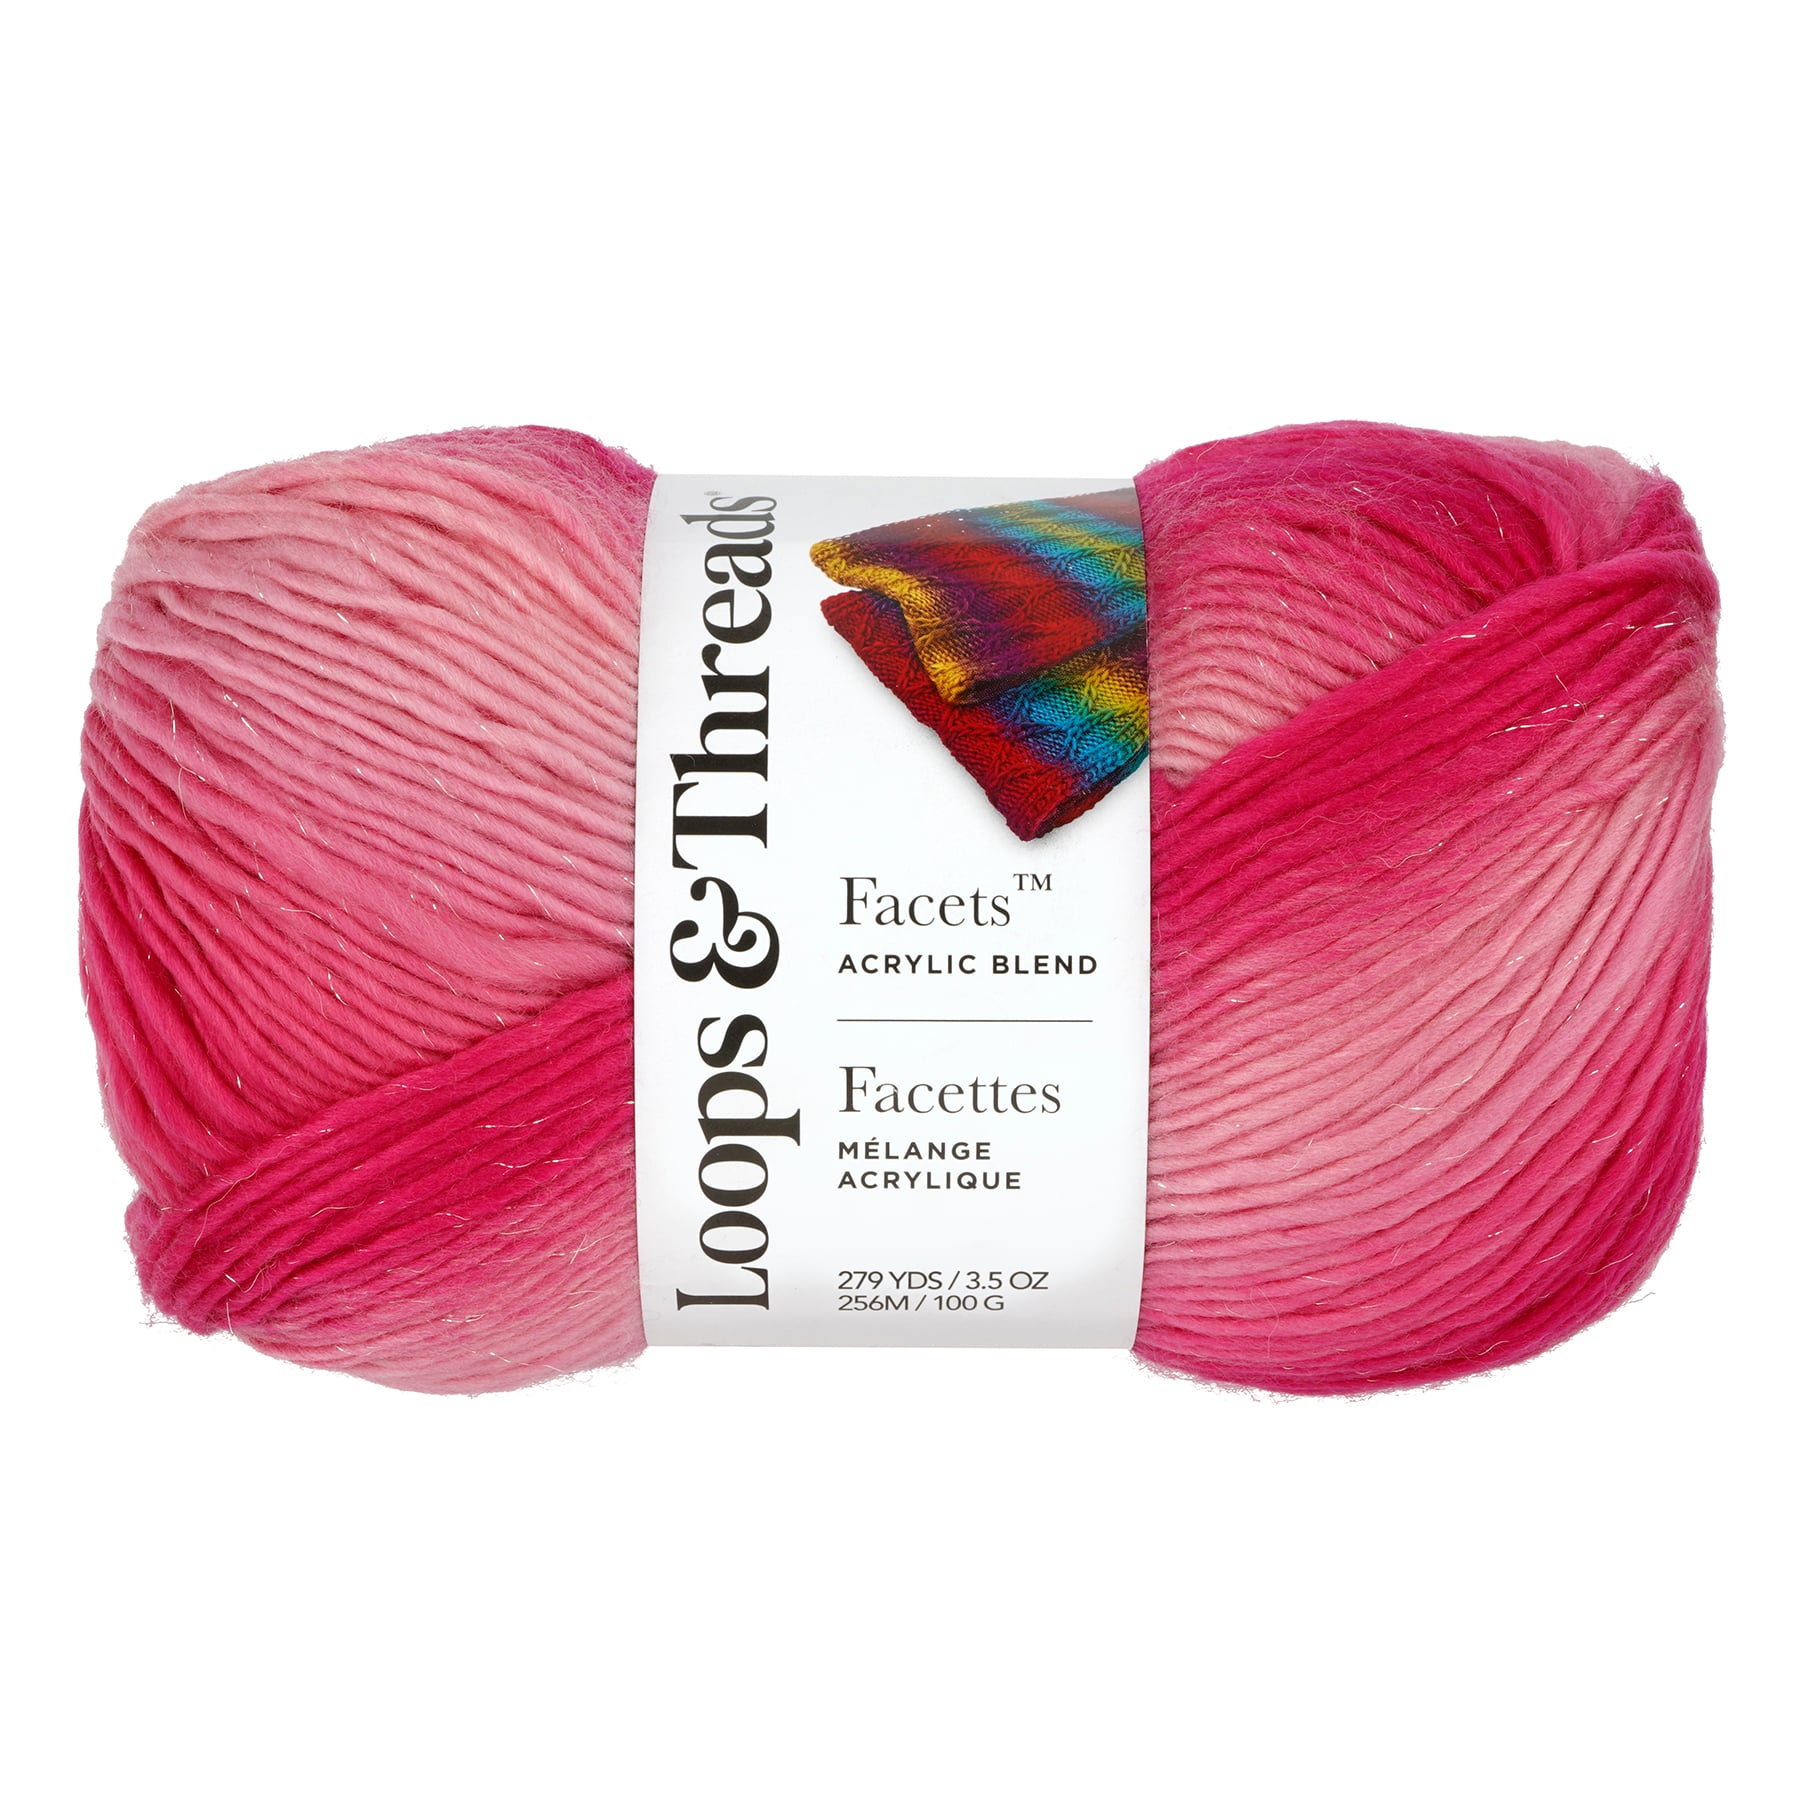 A wide variety of yarns for sale at Michaels, an arts & crafts